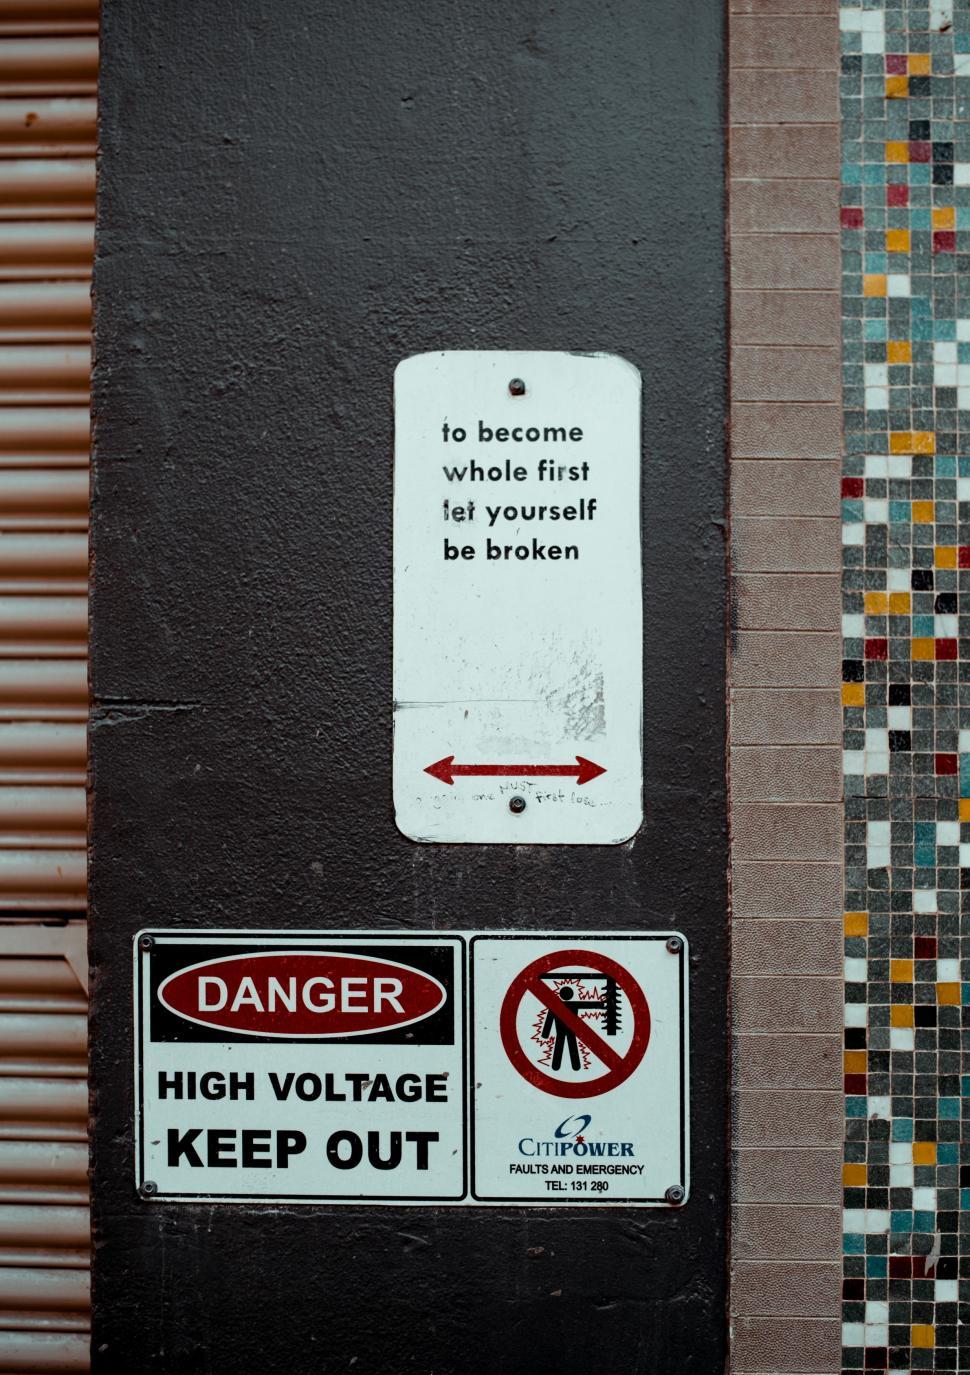 Free Image of Danger High Voltage Keep Out Sign on Building 